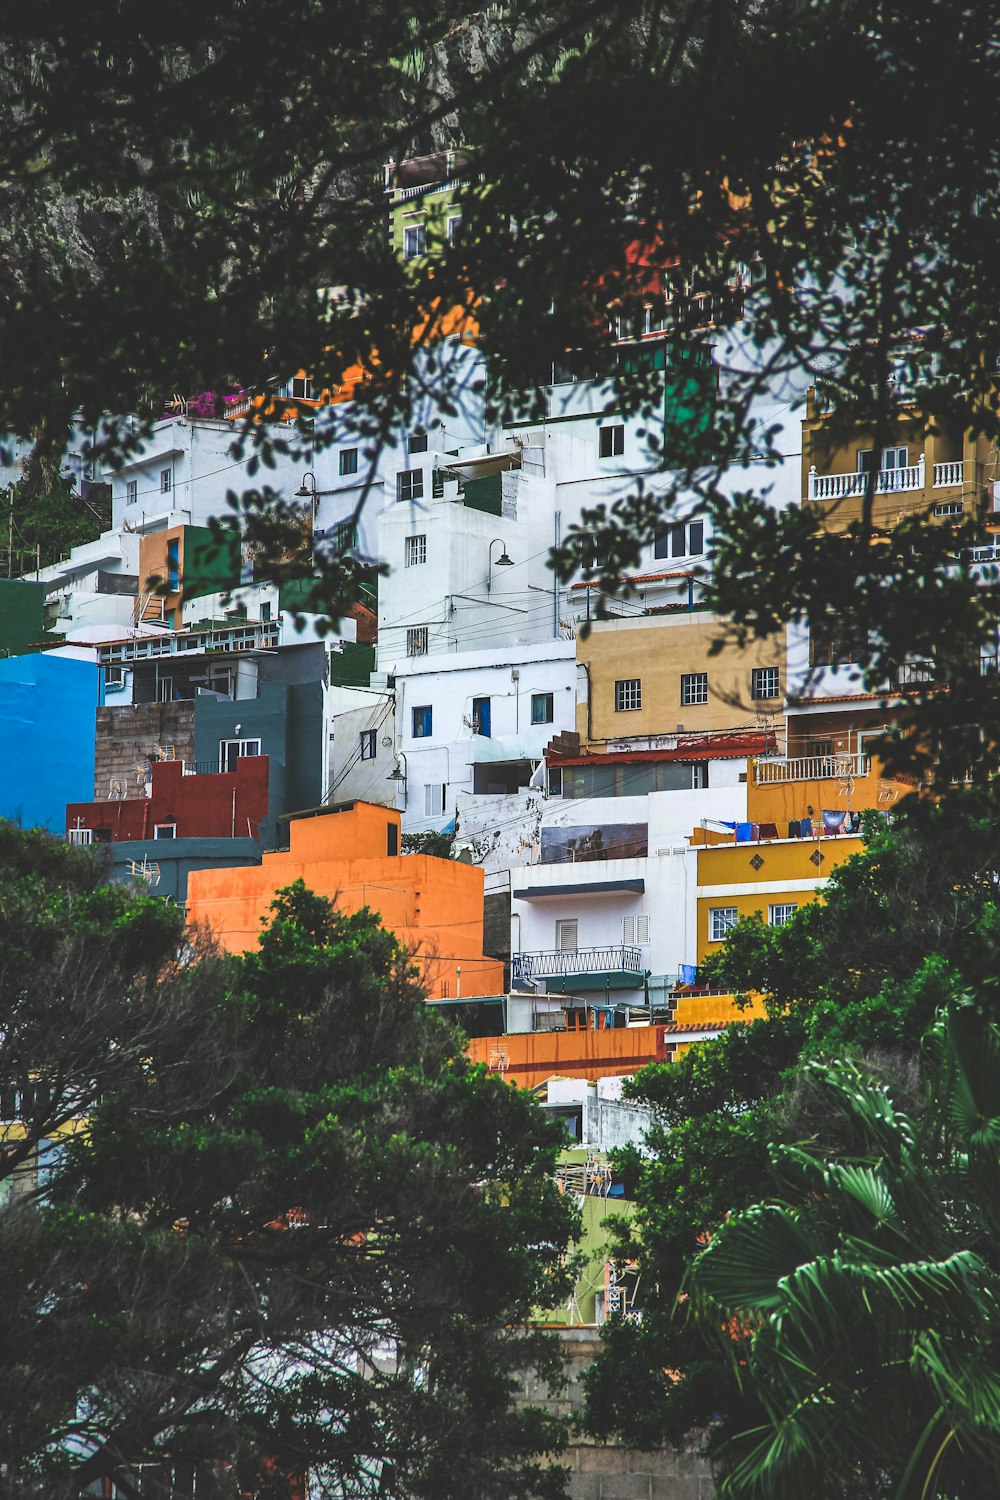 a view of a bunch of houses from behind some trees